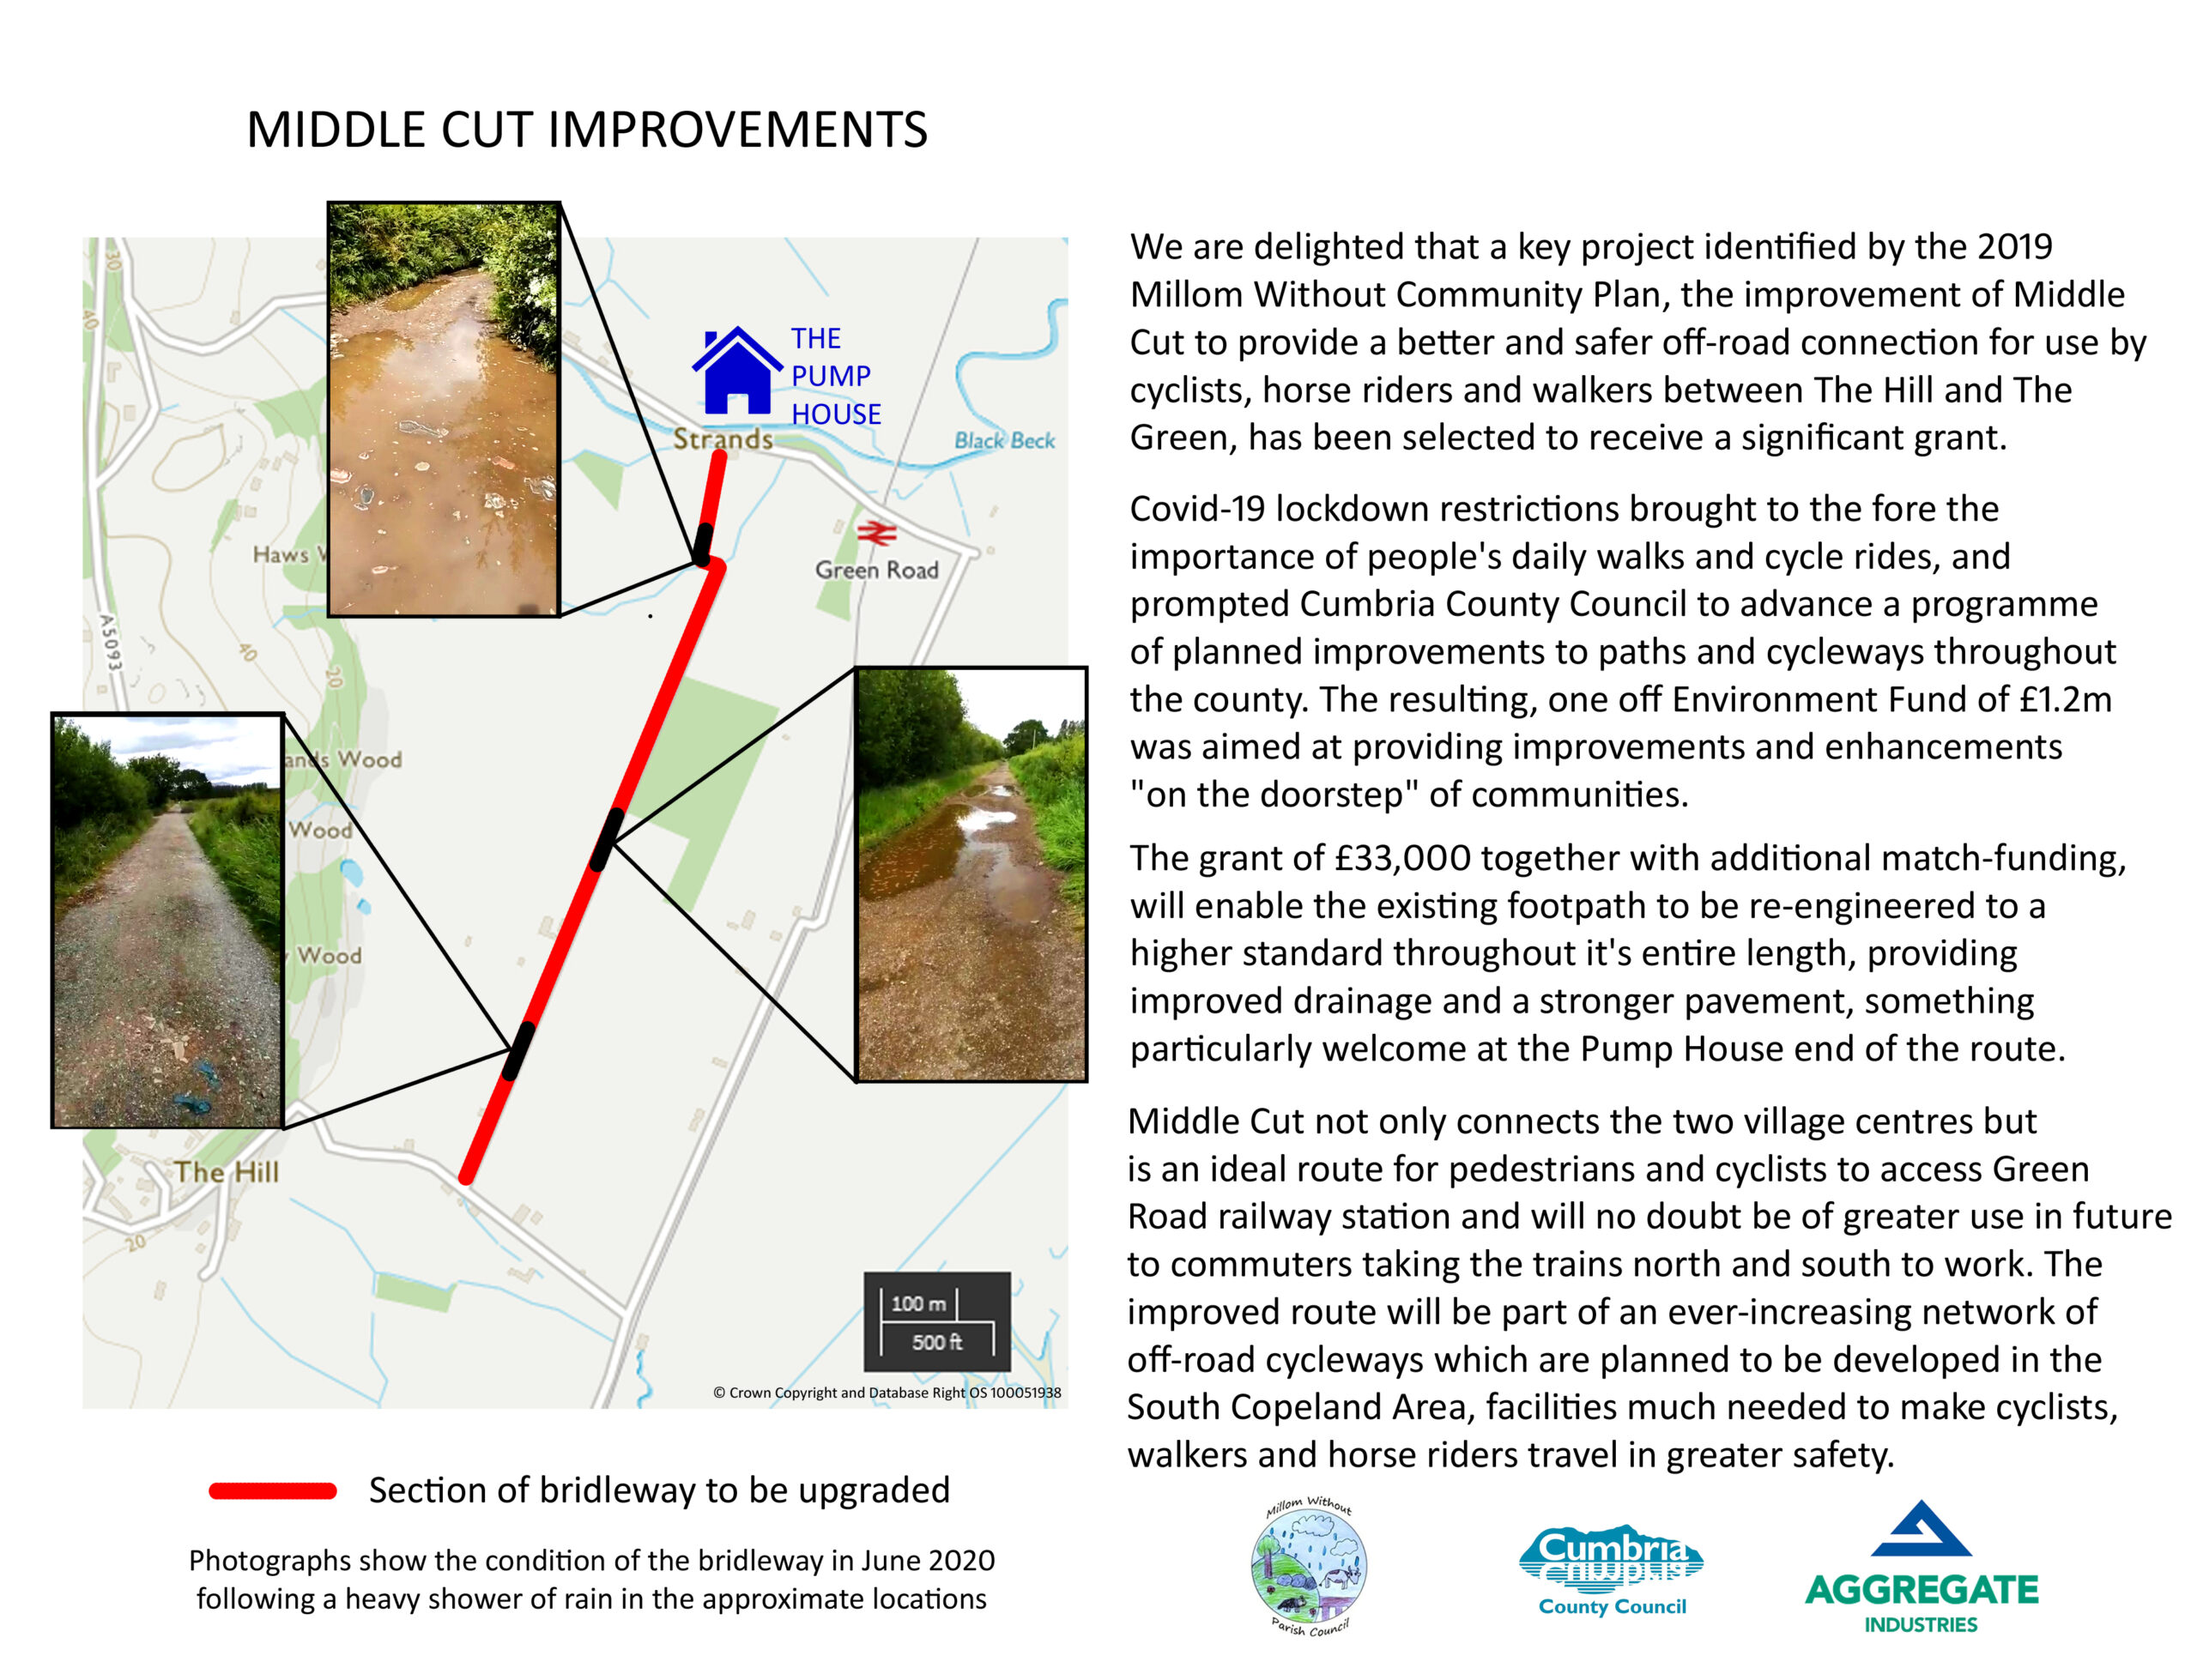 Information board for Middle Cut improvements